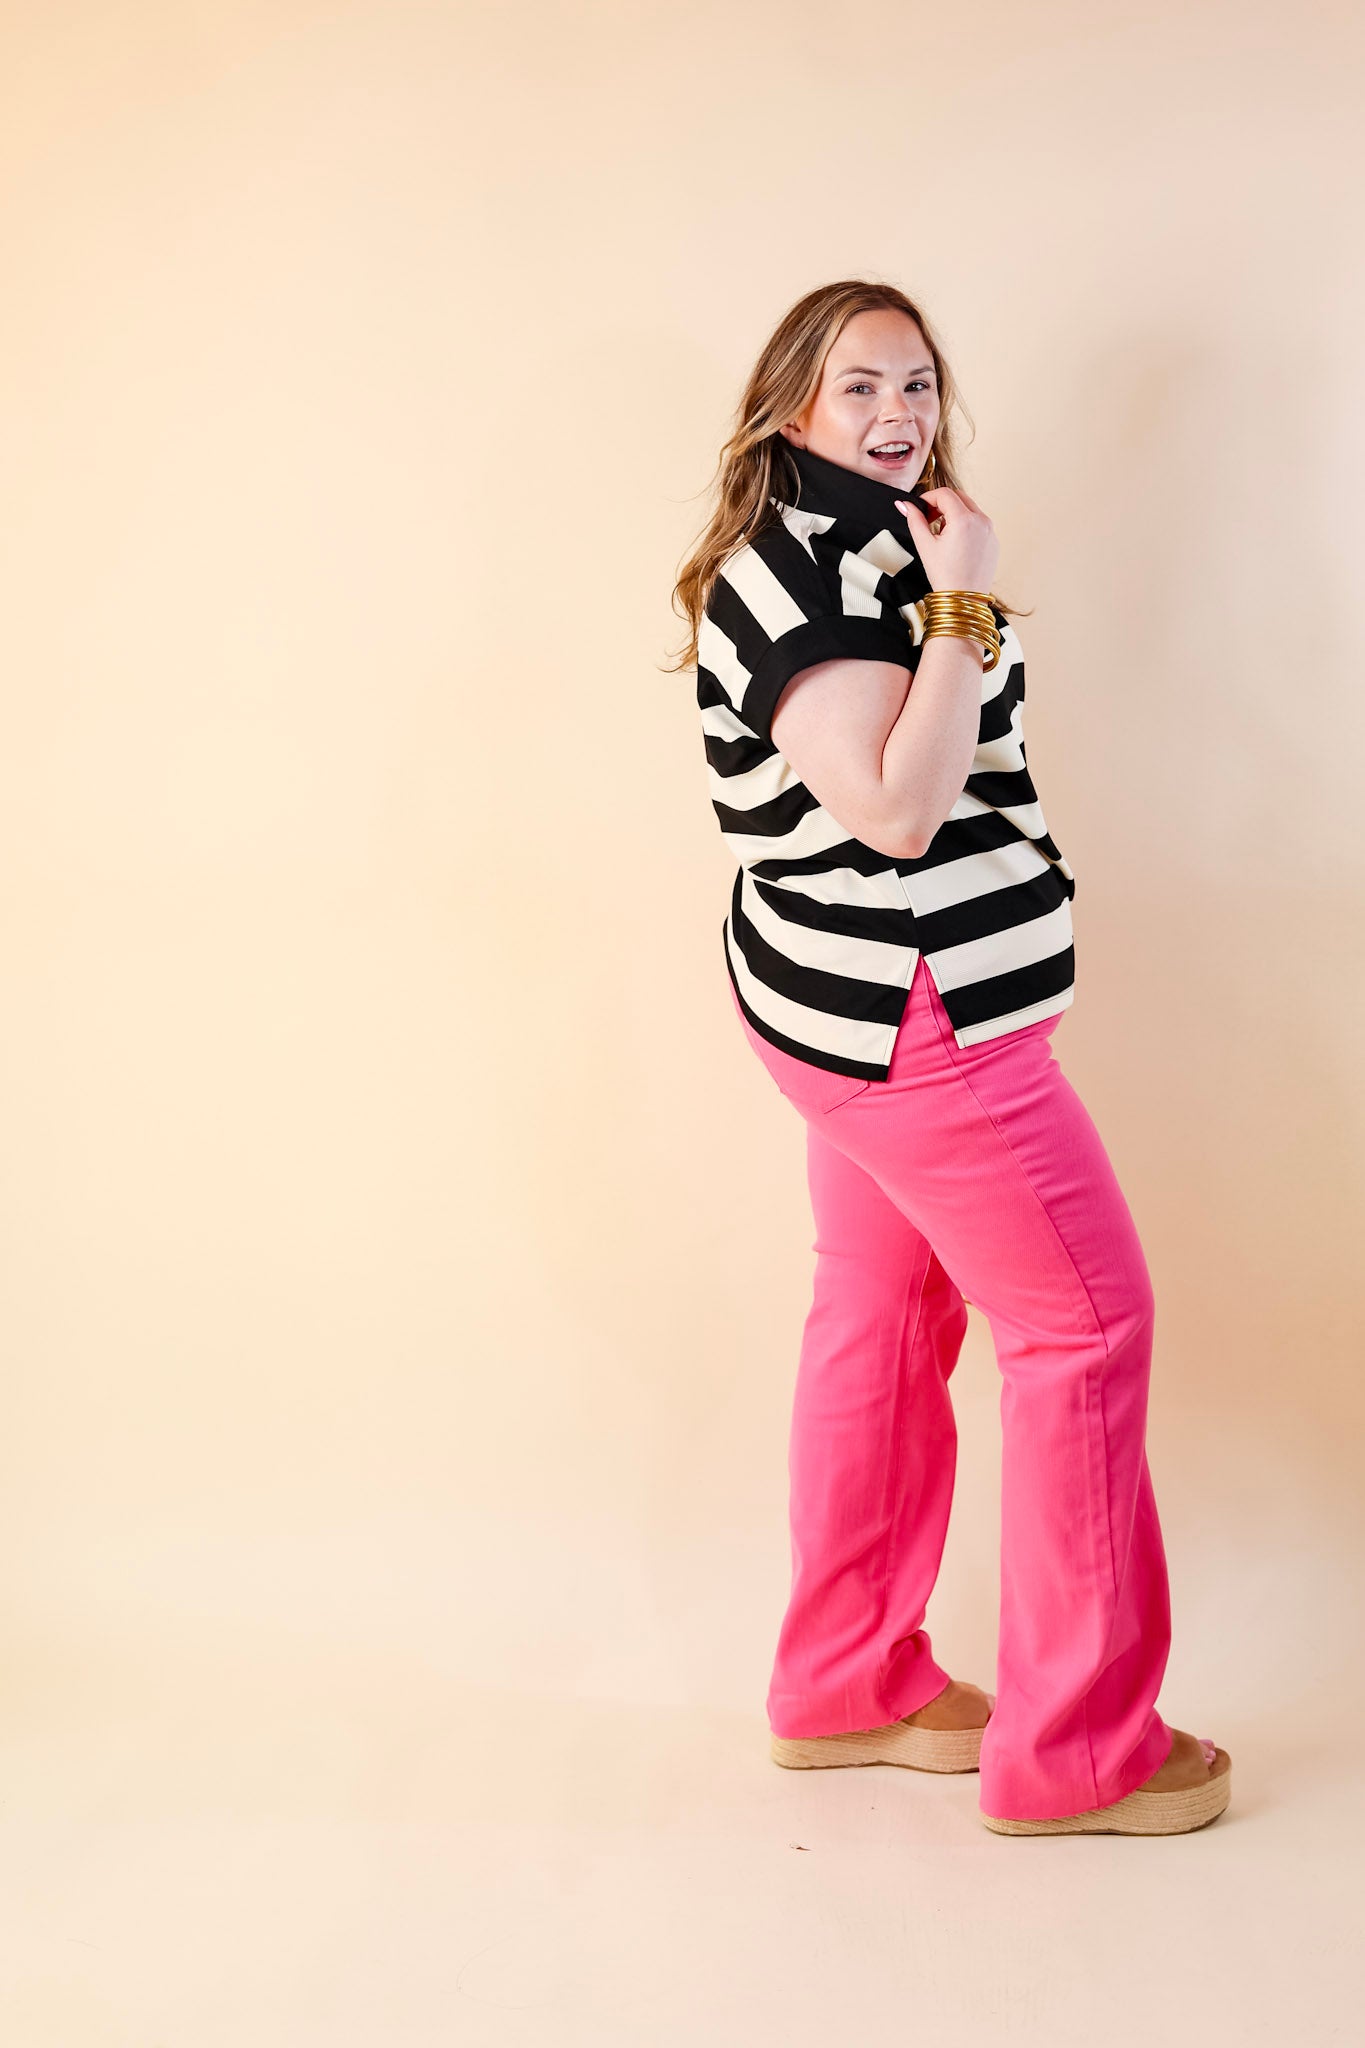 Stripe it Simple Collared Stripe Top with Drop Sleeves in Black and Cream - Giddy Up Glamour Boutique